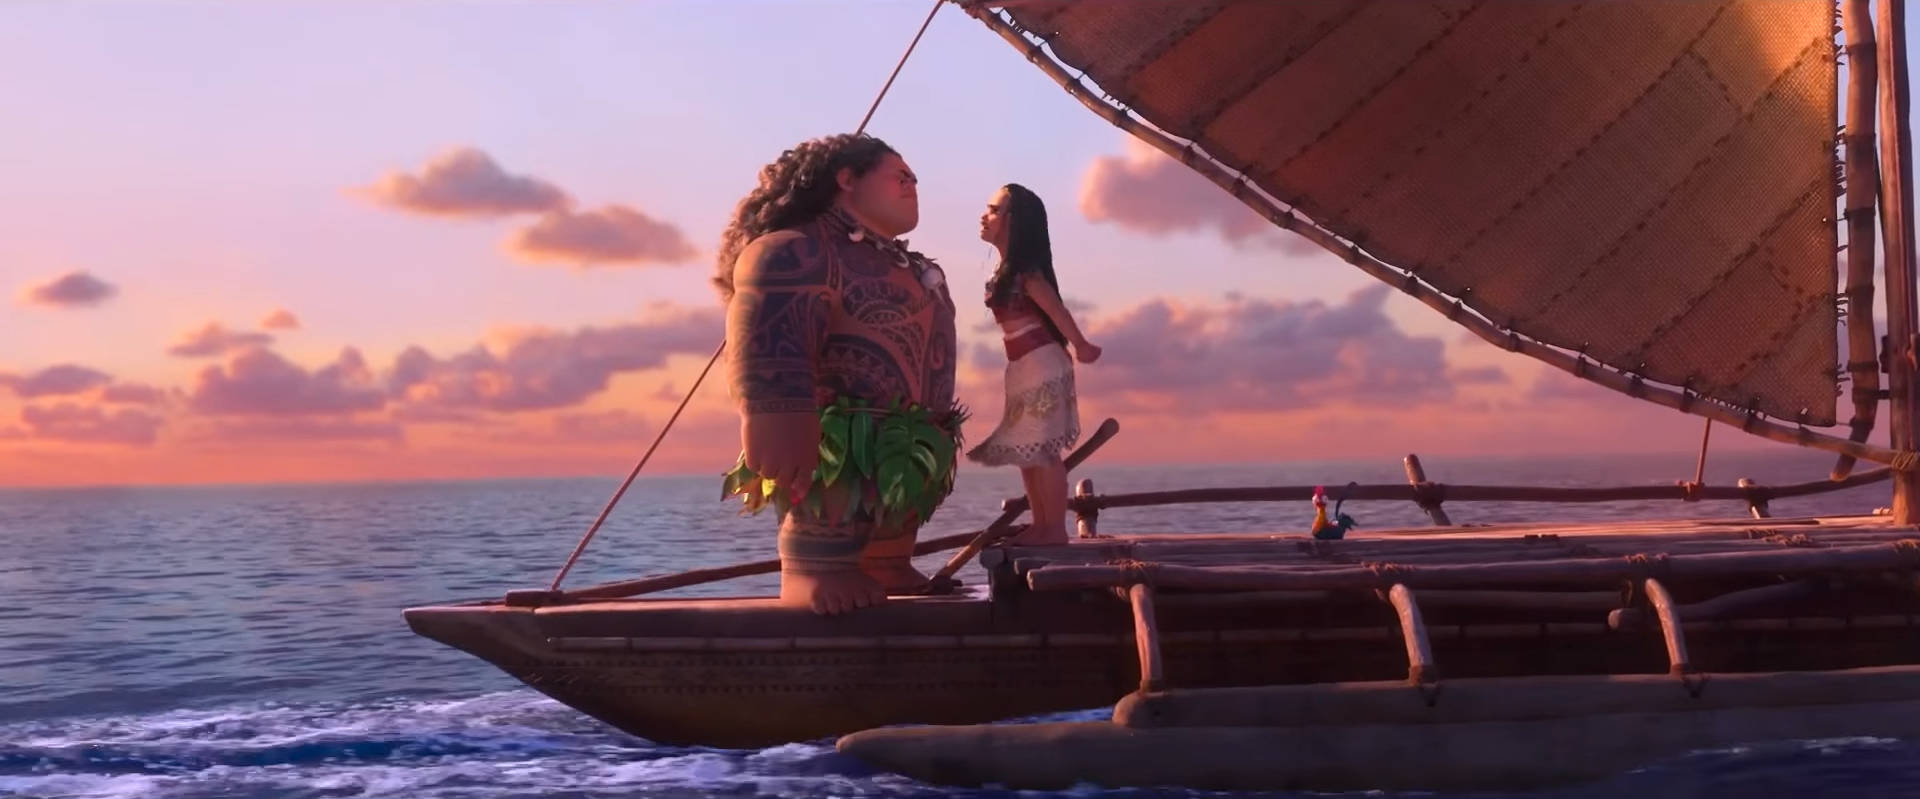 Moana In Front Of Maui